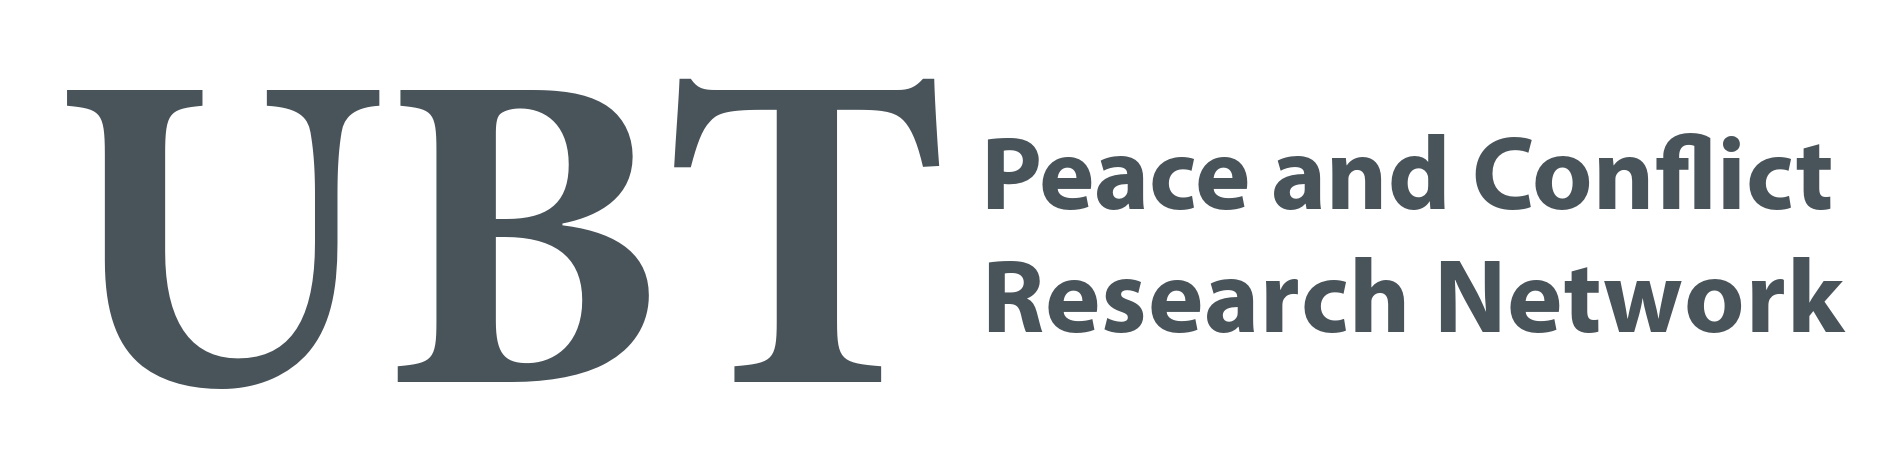 Logo Peace and Conflict Research